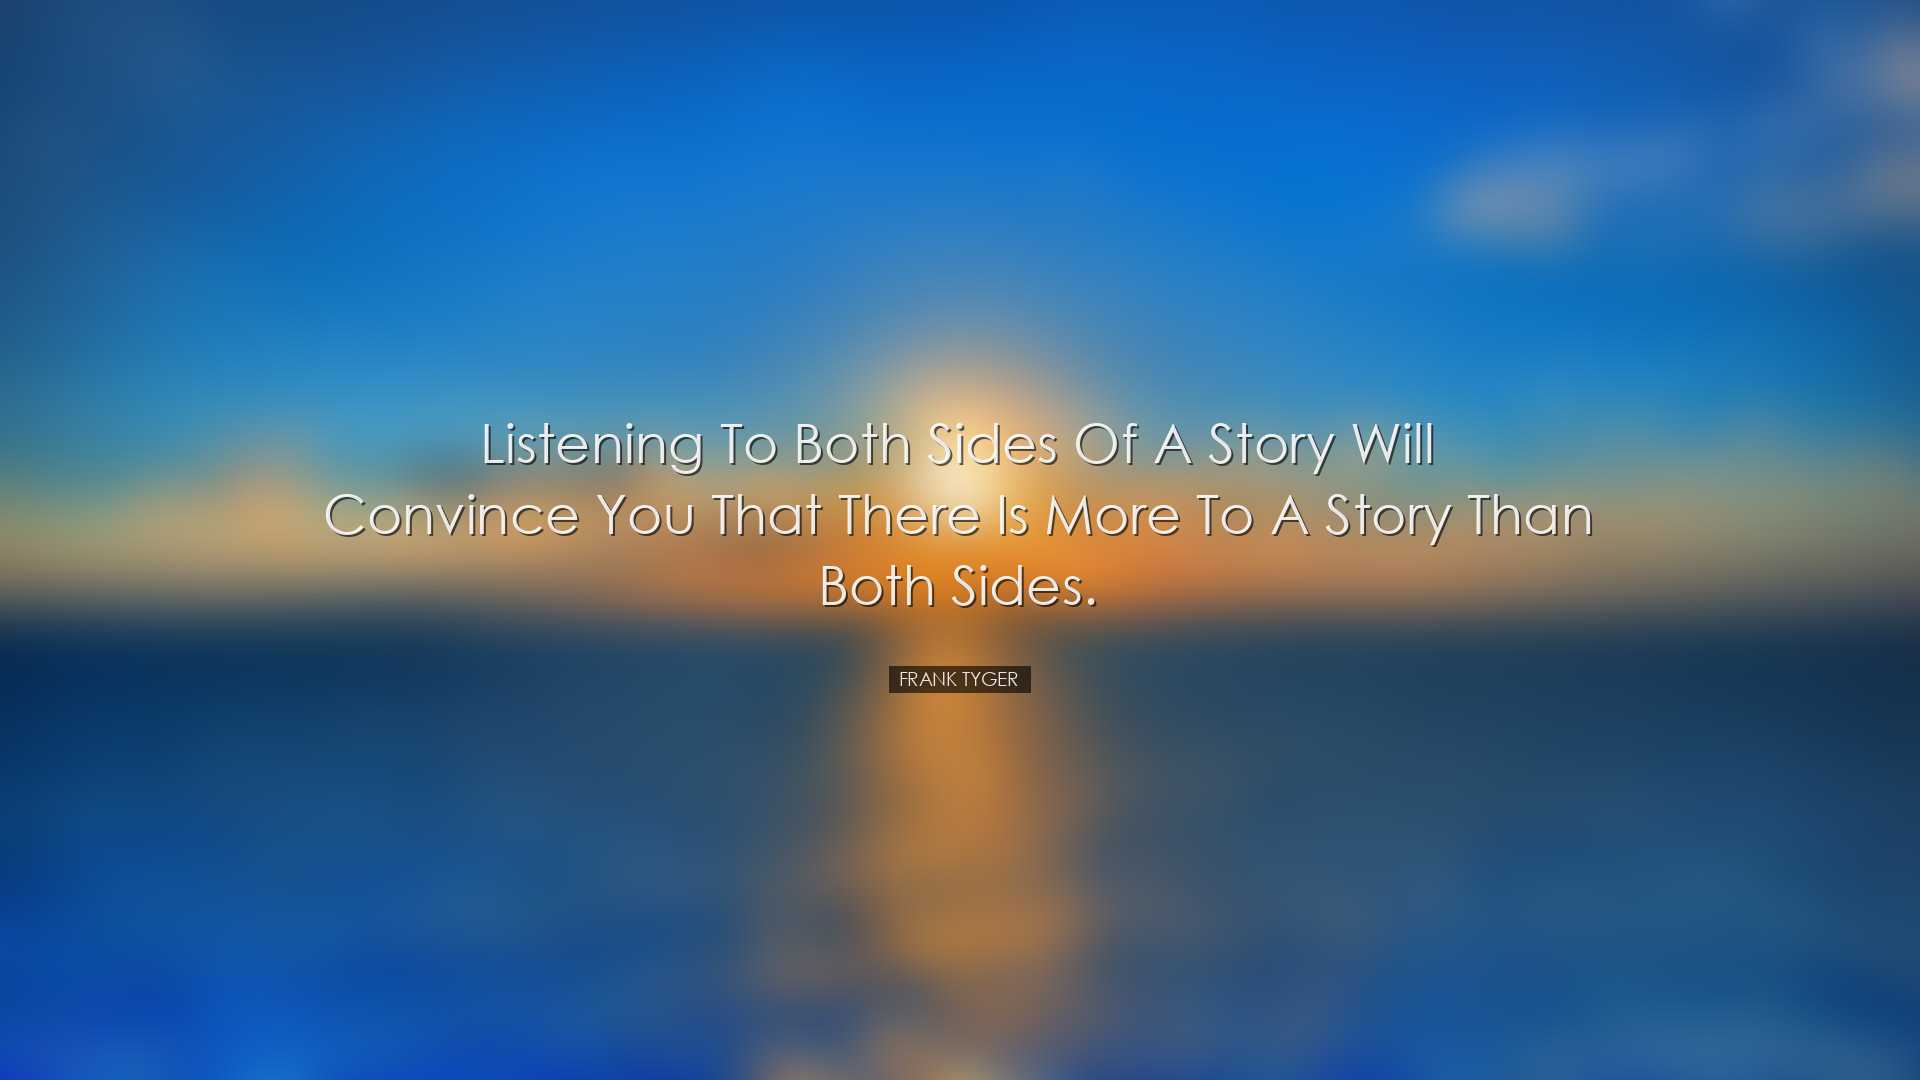 Listening to both sides of a story will convince you that there is